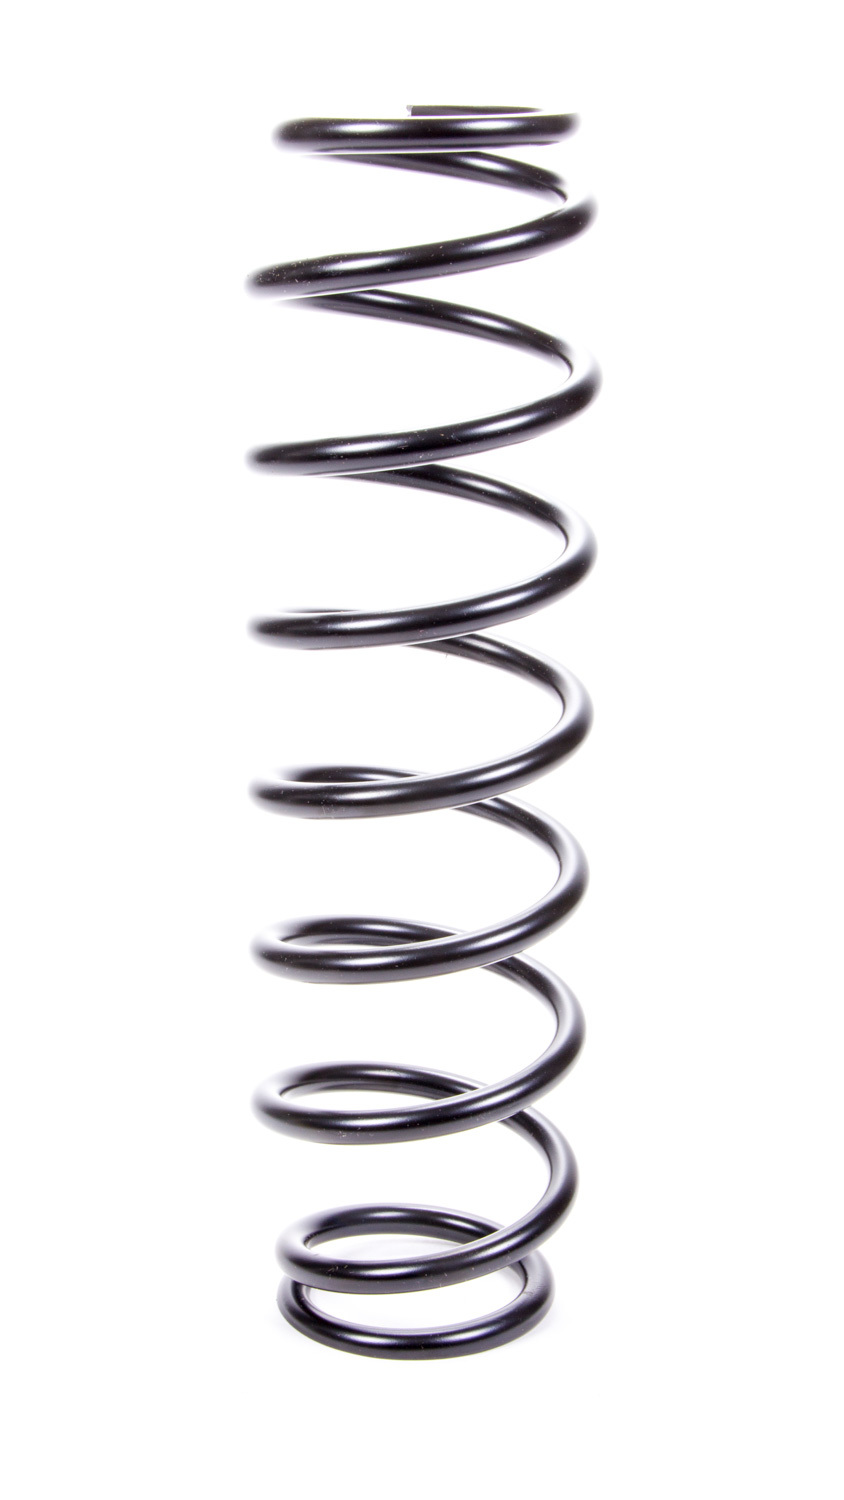 Swift Springs 120-250-400B Coil Spring, Barrel, Coil-Over, 2.500 in ID, 12.000 in Length, 400 lb/in Spring Rate, Steel, Black Powder Coat, Each